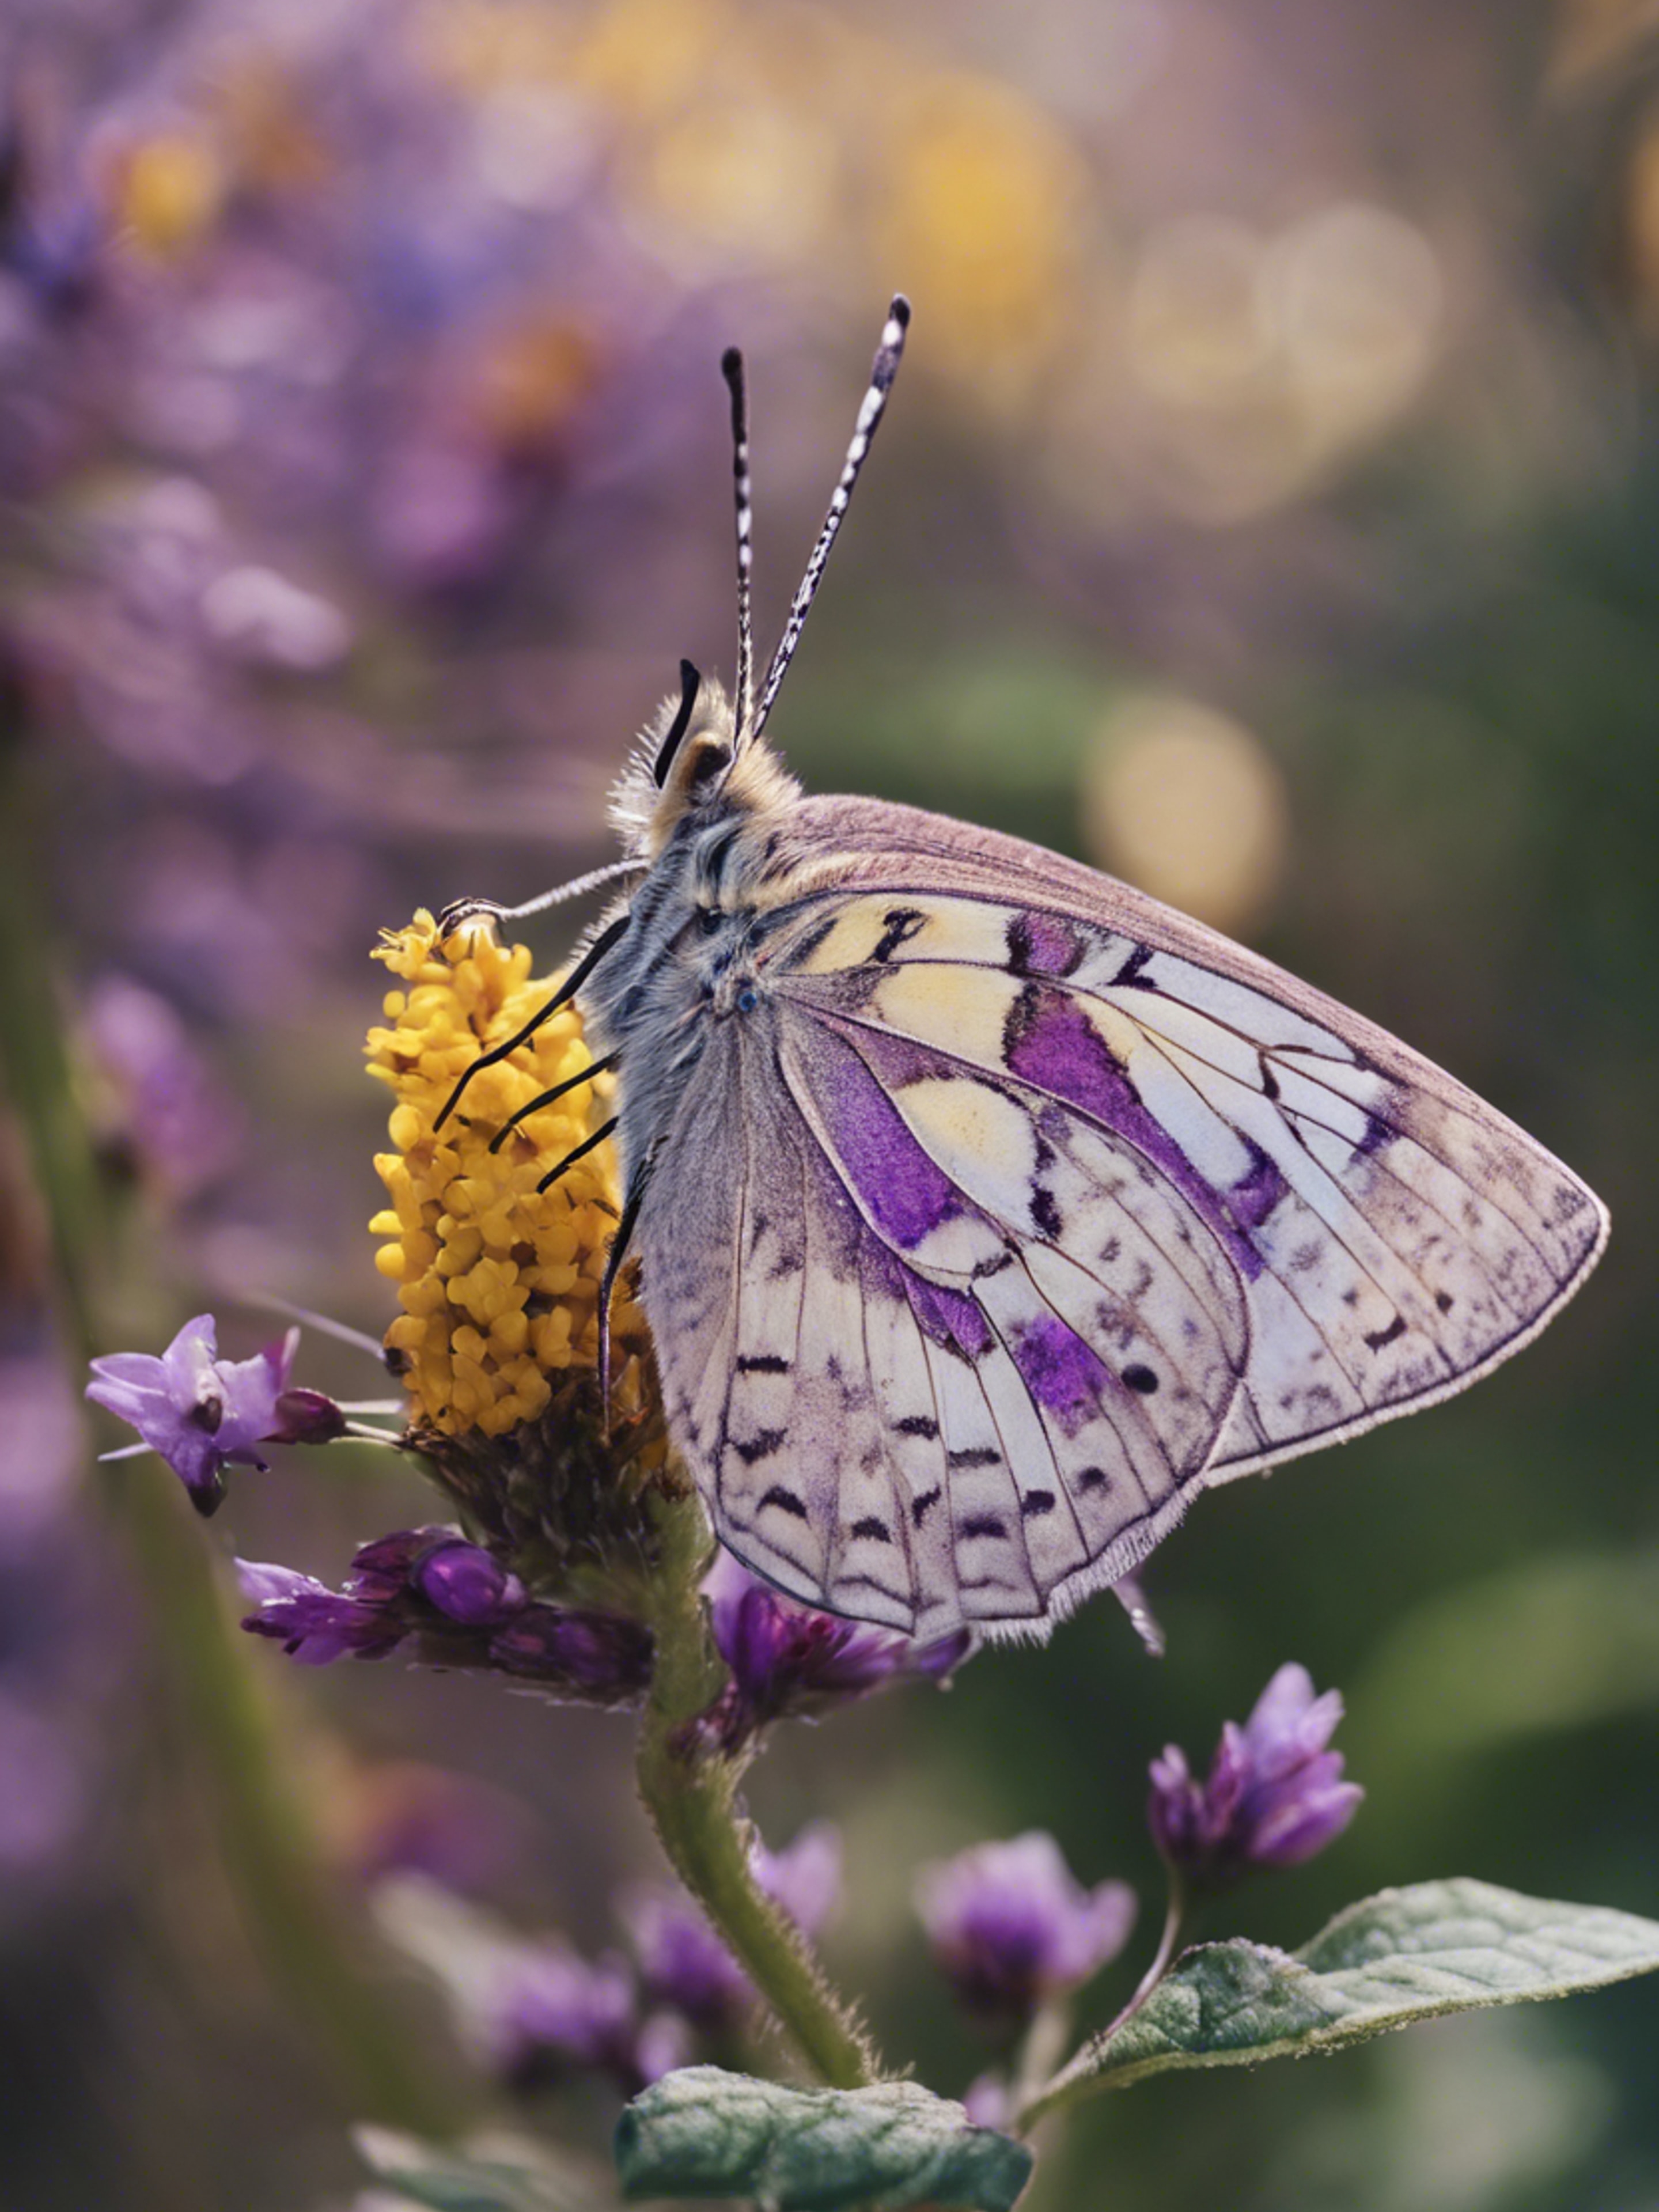 A beautiful butterfly with detailed purple and yellow wings resting on a blooming flower. Wallpaper[3e976ae7be264a5da695]